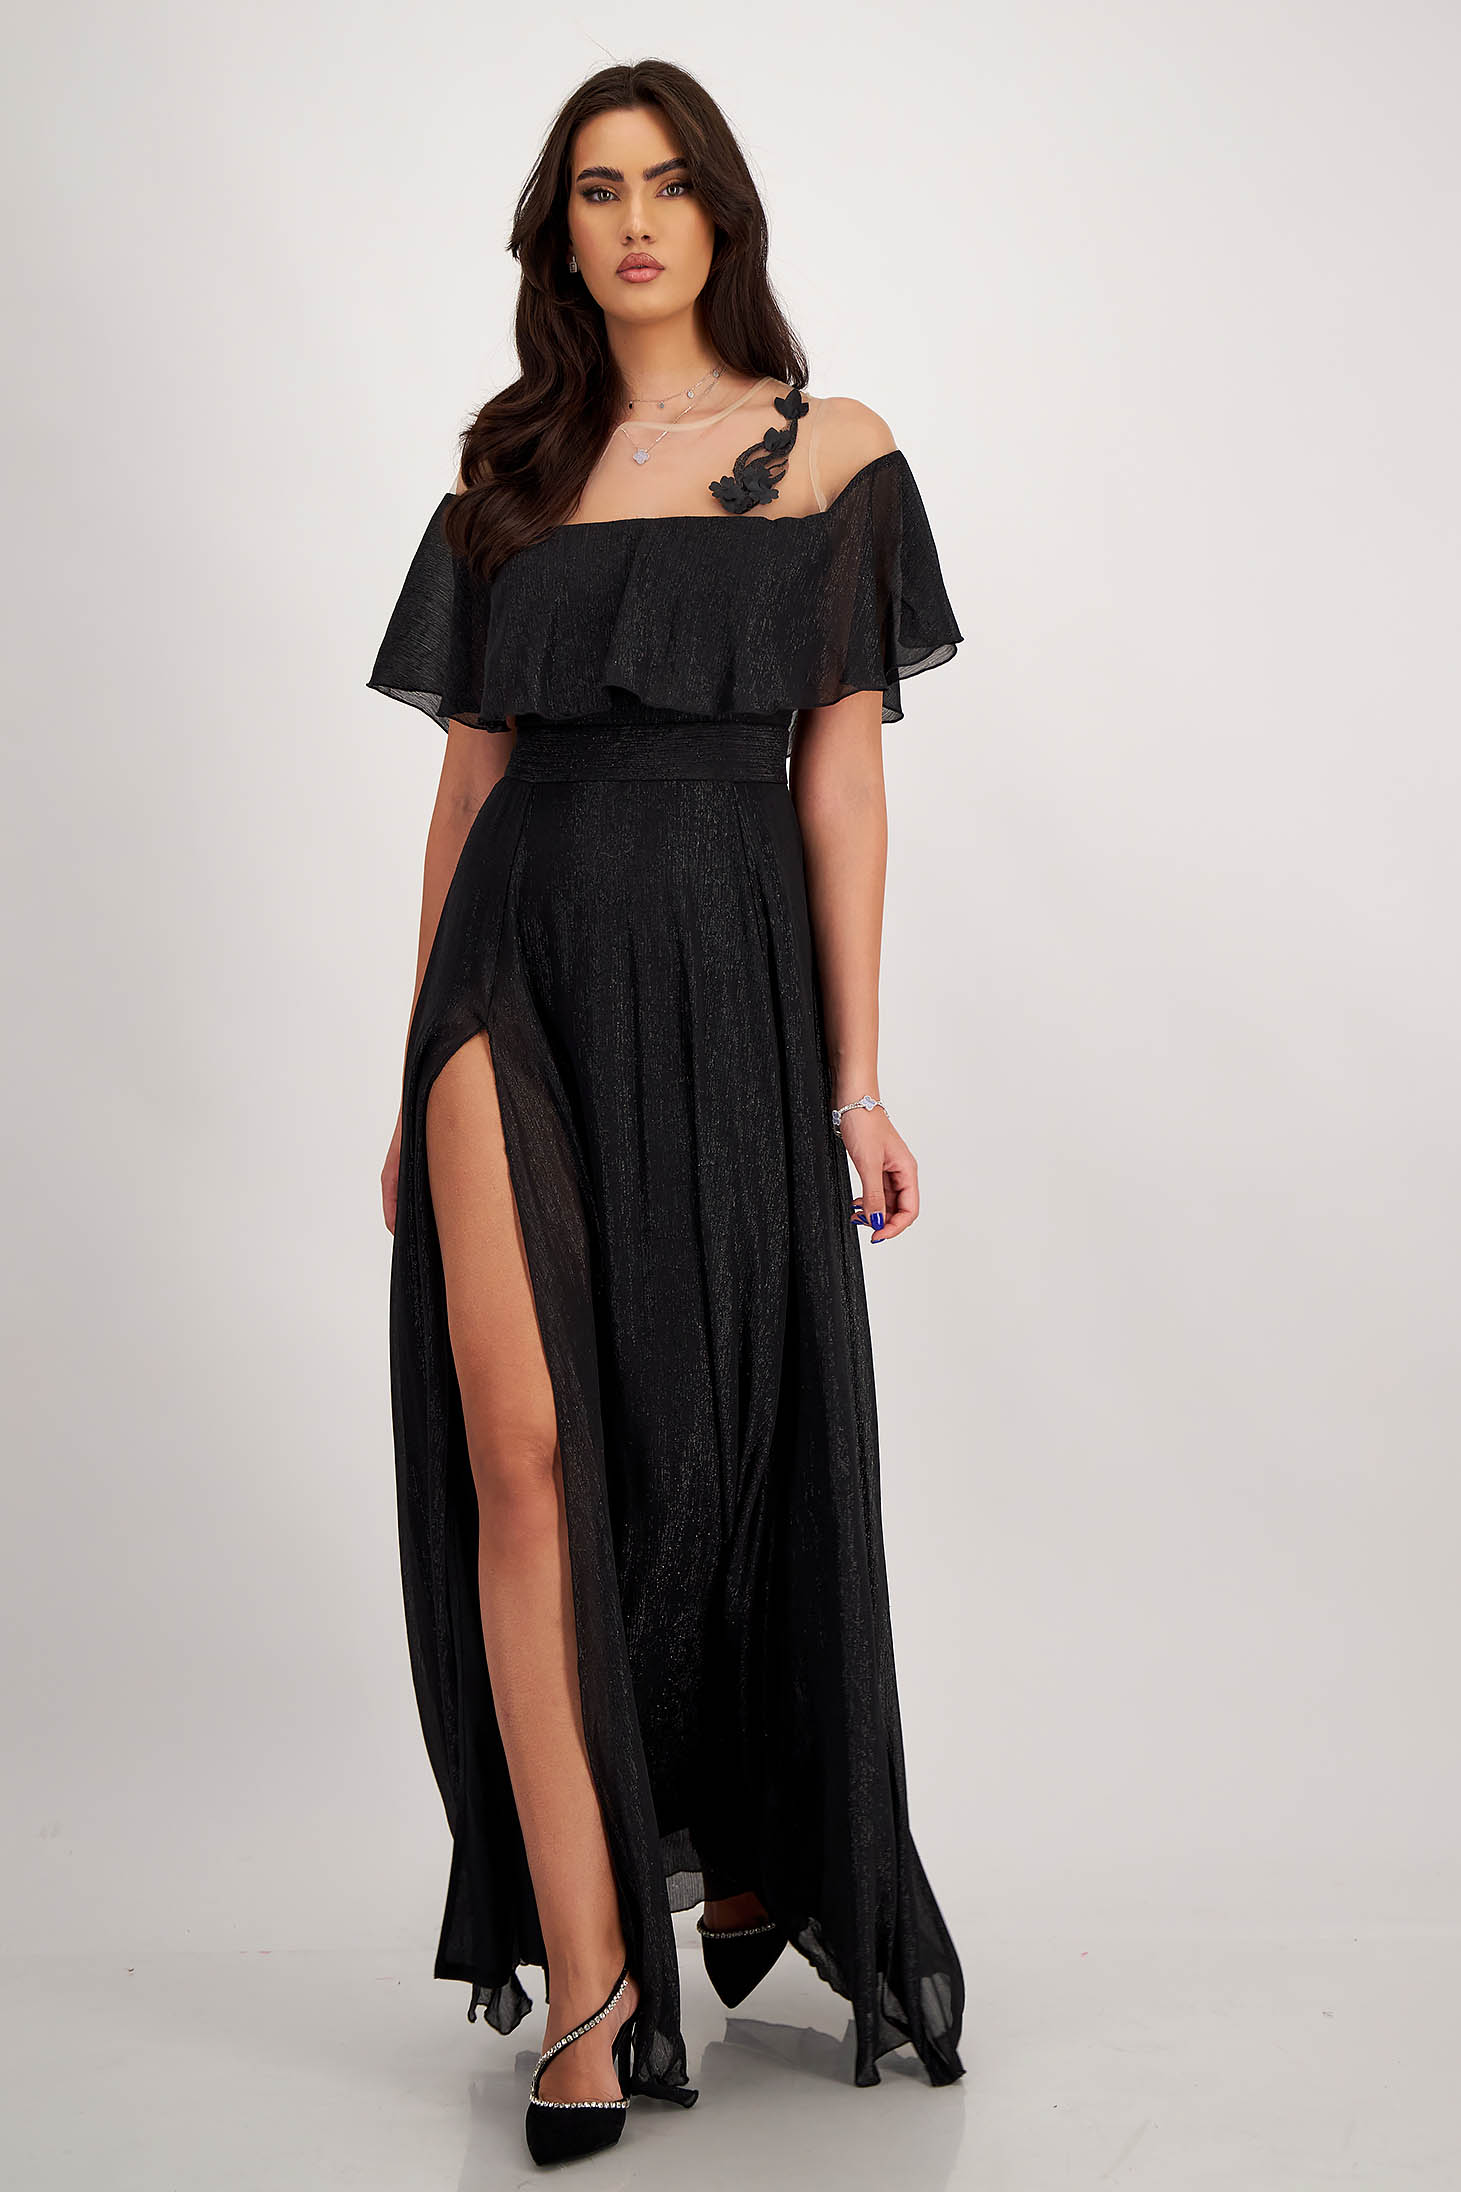 Black long chiffon dress with glitter inserts, flared with a slit on the leg - Artista